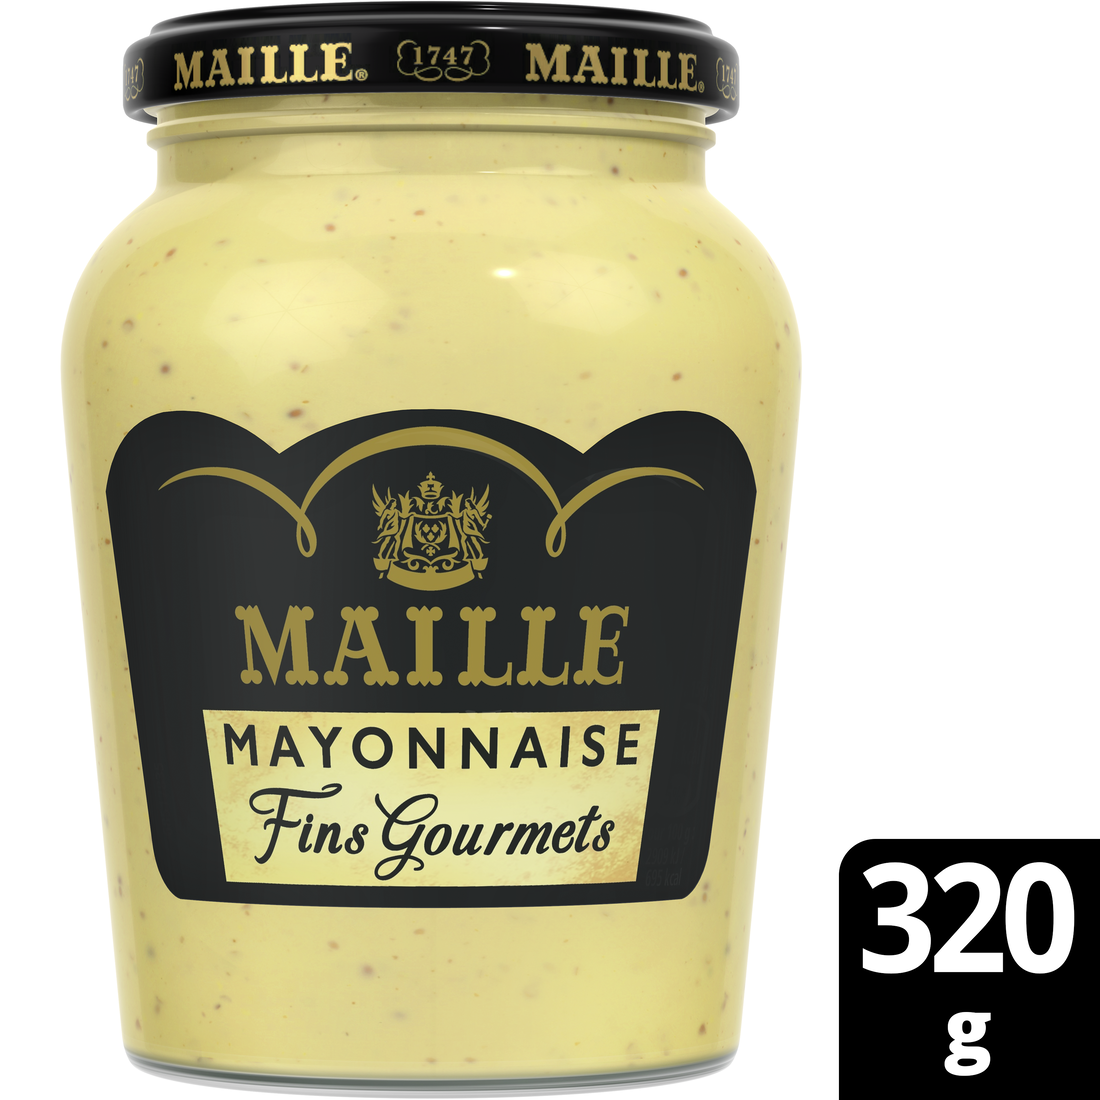 Maille - Mayonnaise Fins Gourmets Bocal 320 g